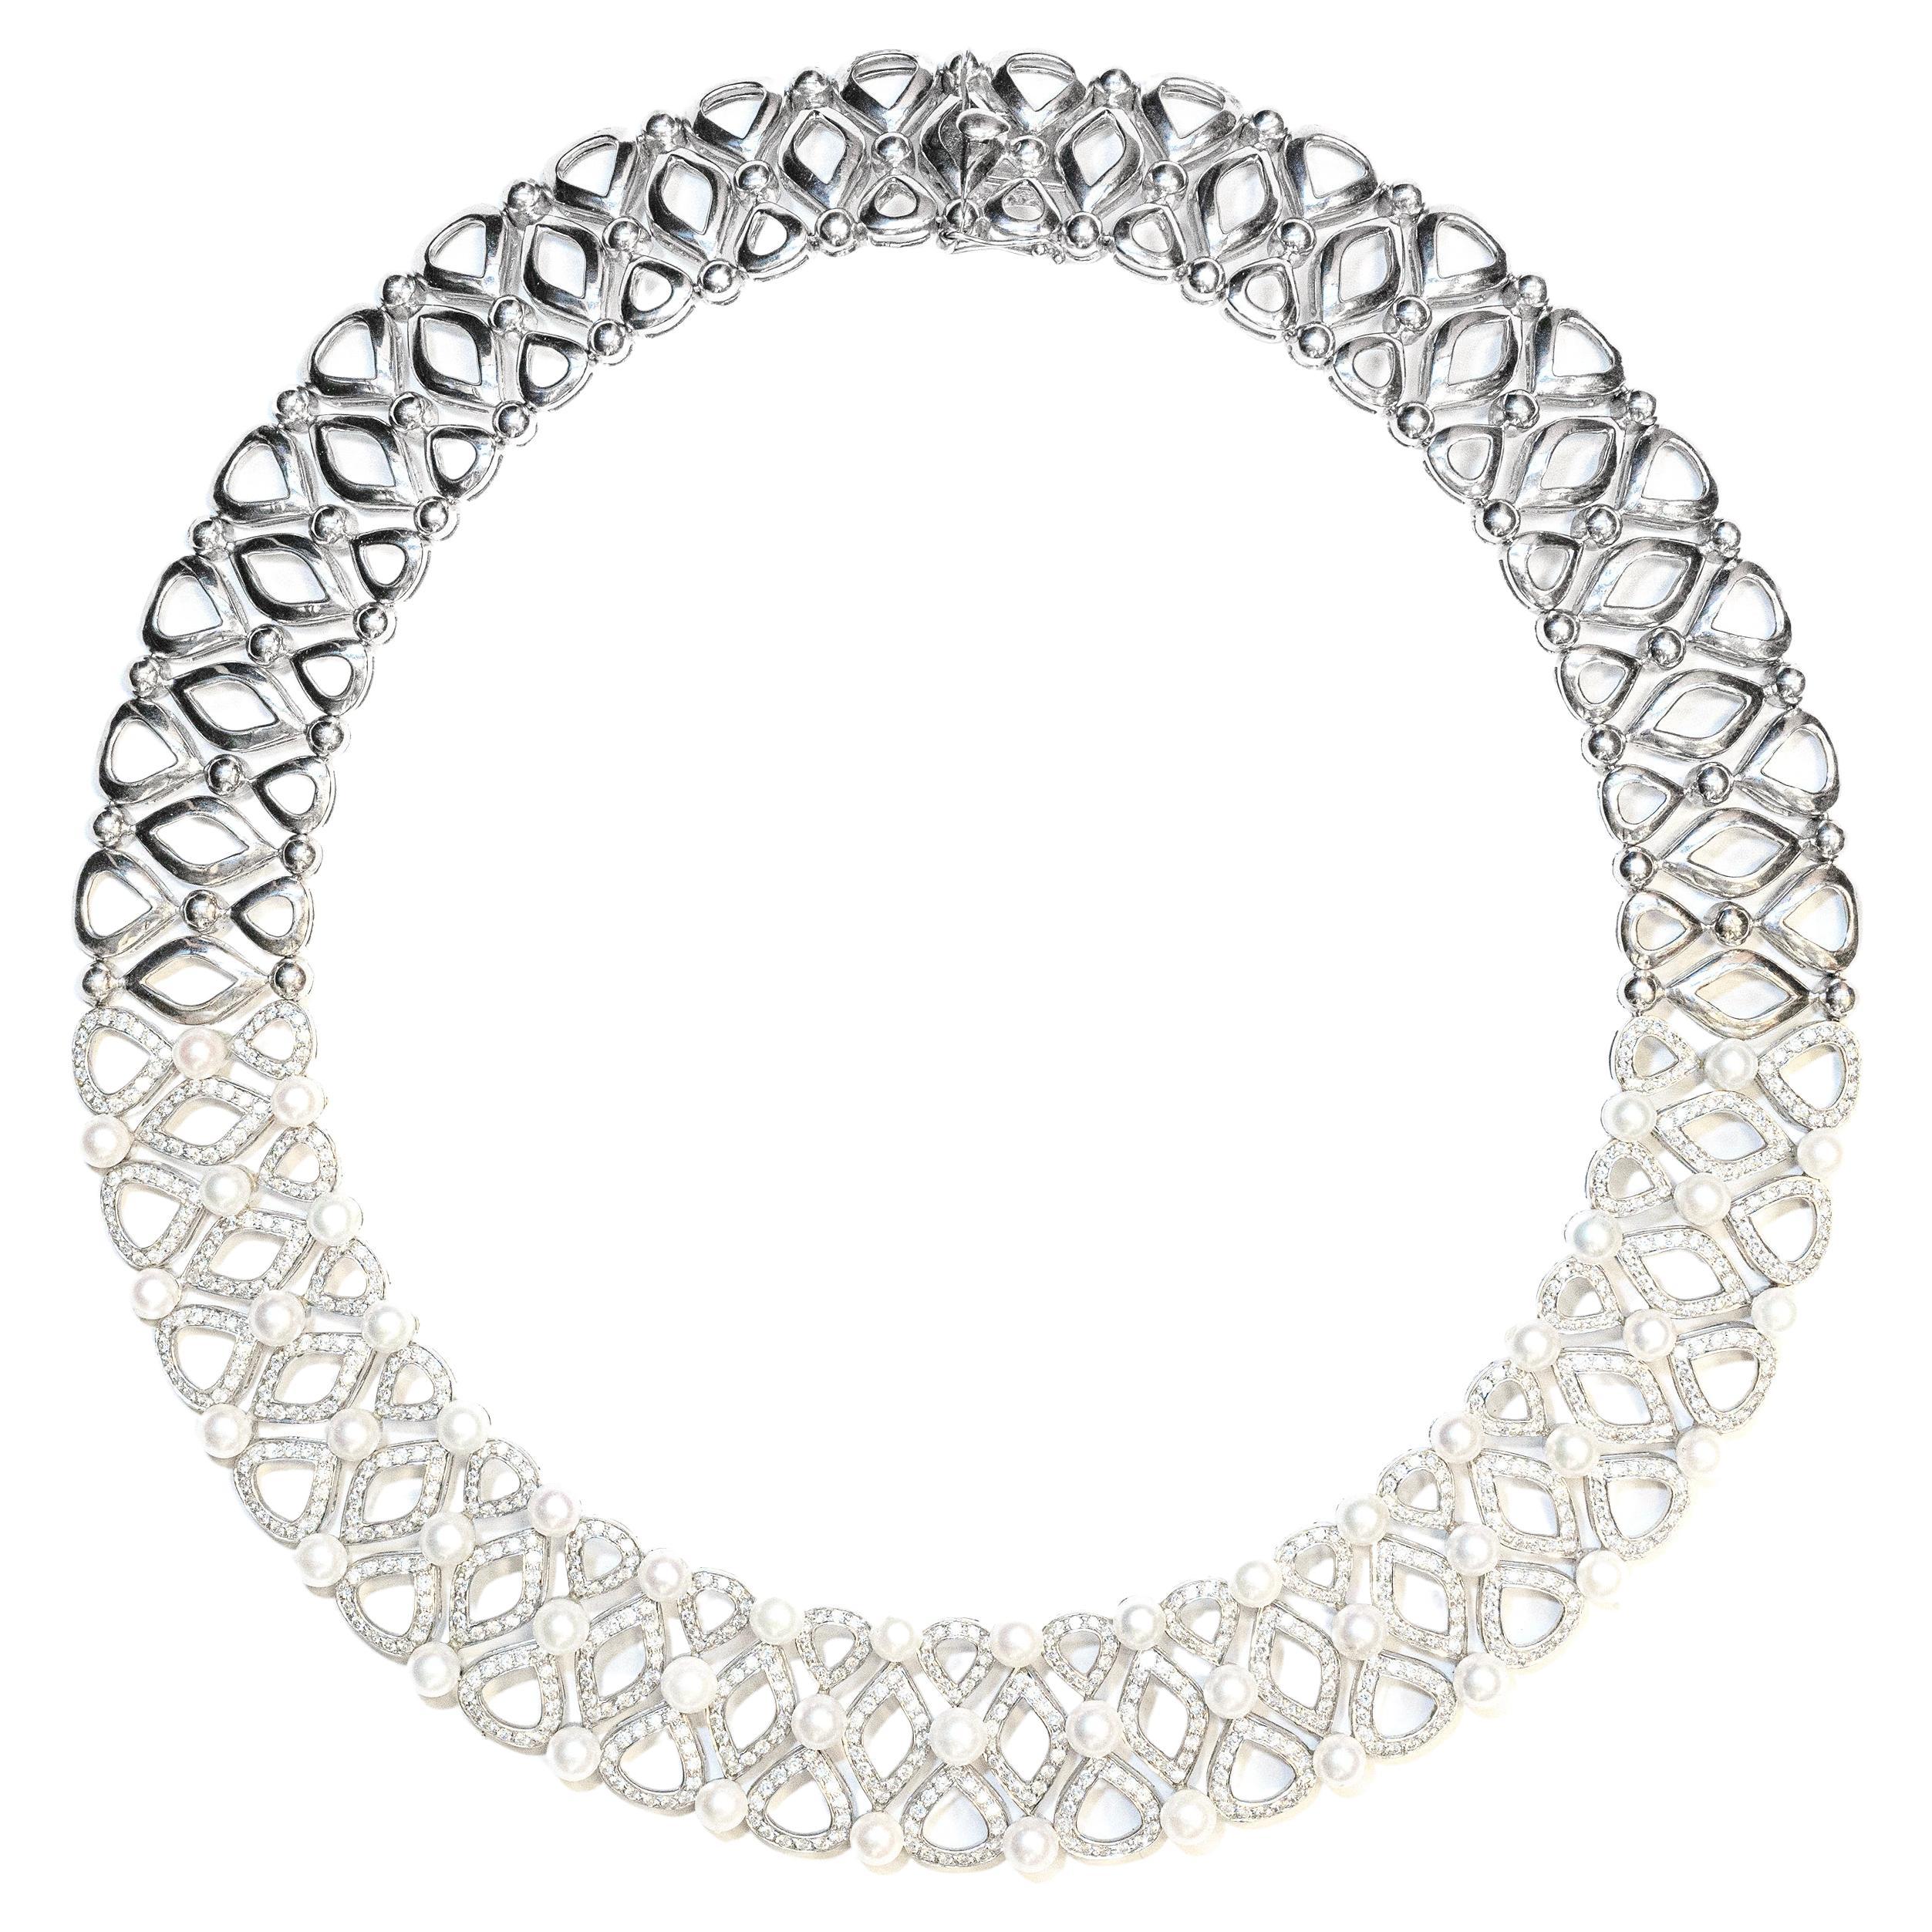 10.72 Carat Diamond and Cultured Pearl 18 Carat White Gold Wide Collar Necklace For Sale